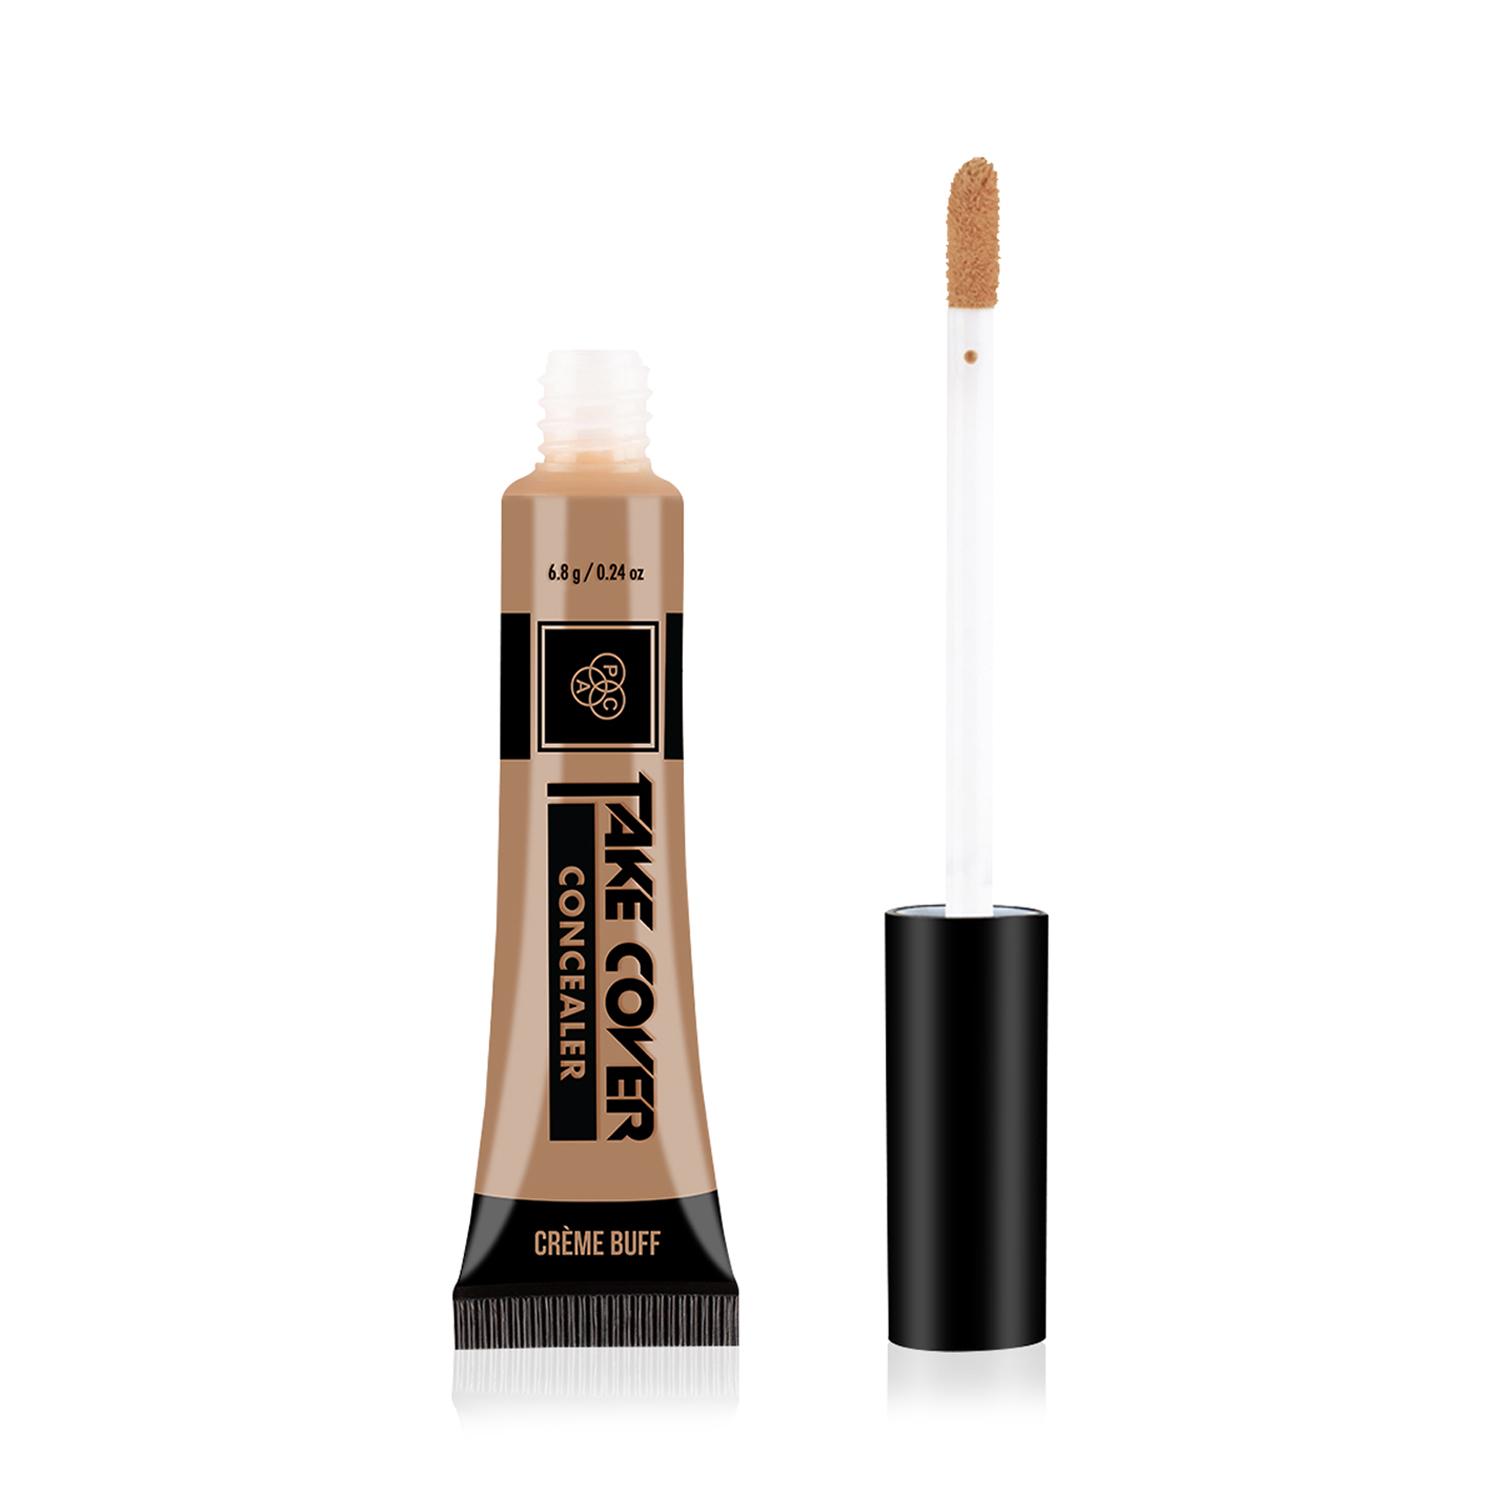 PAC | PAC Take Cover Concealer - 04 Creme Buff (6.8g)